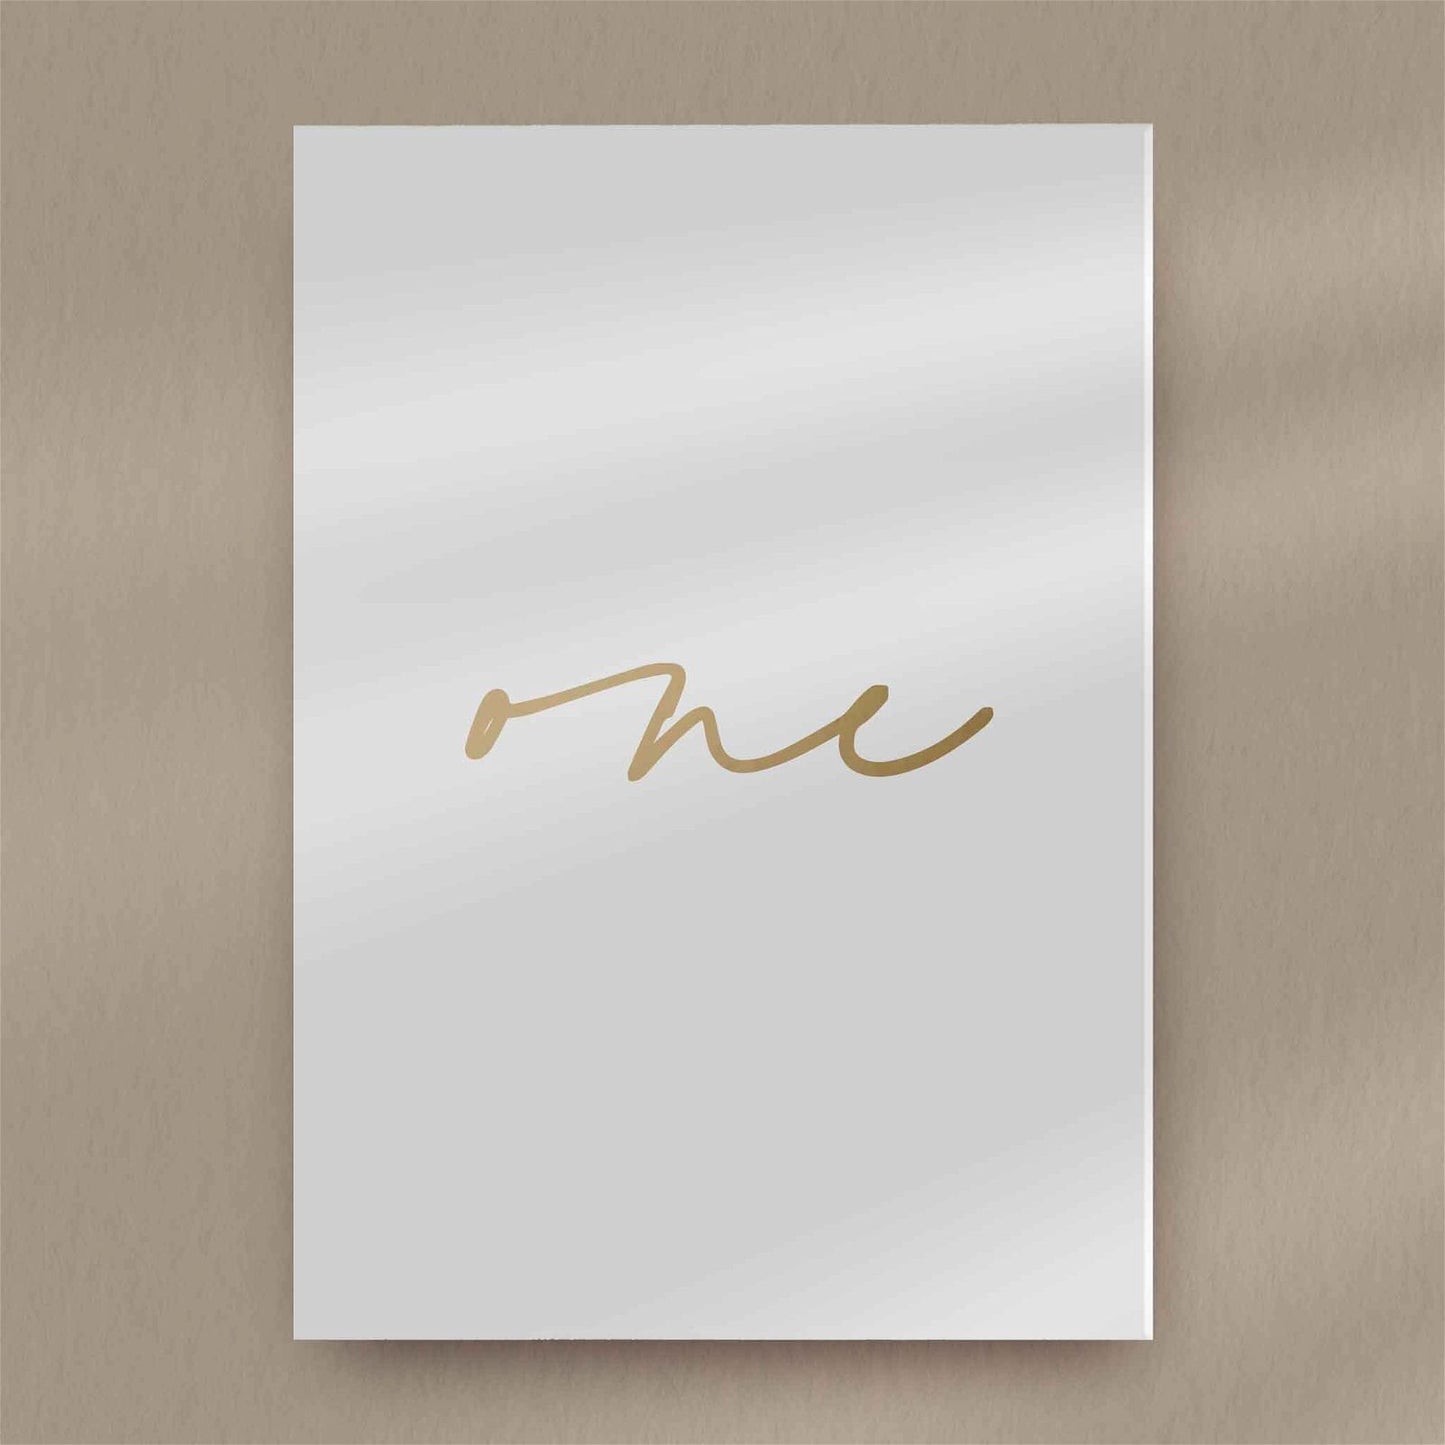 Chloe Table Number  Ivy and Gold Wedding Stationery   